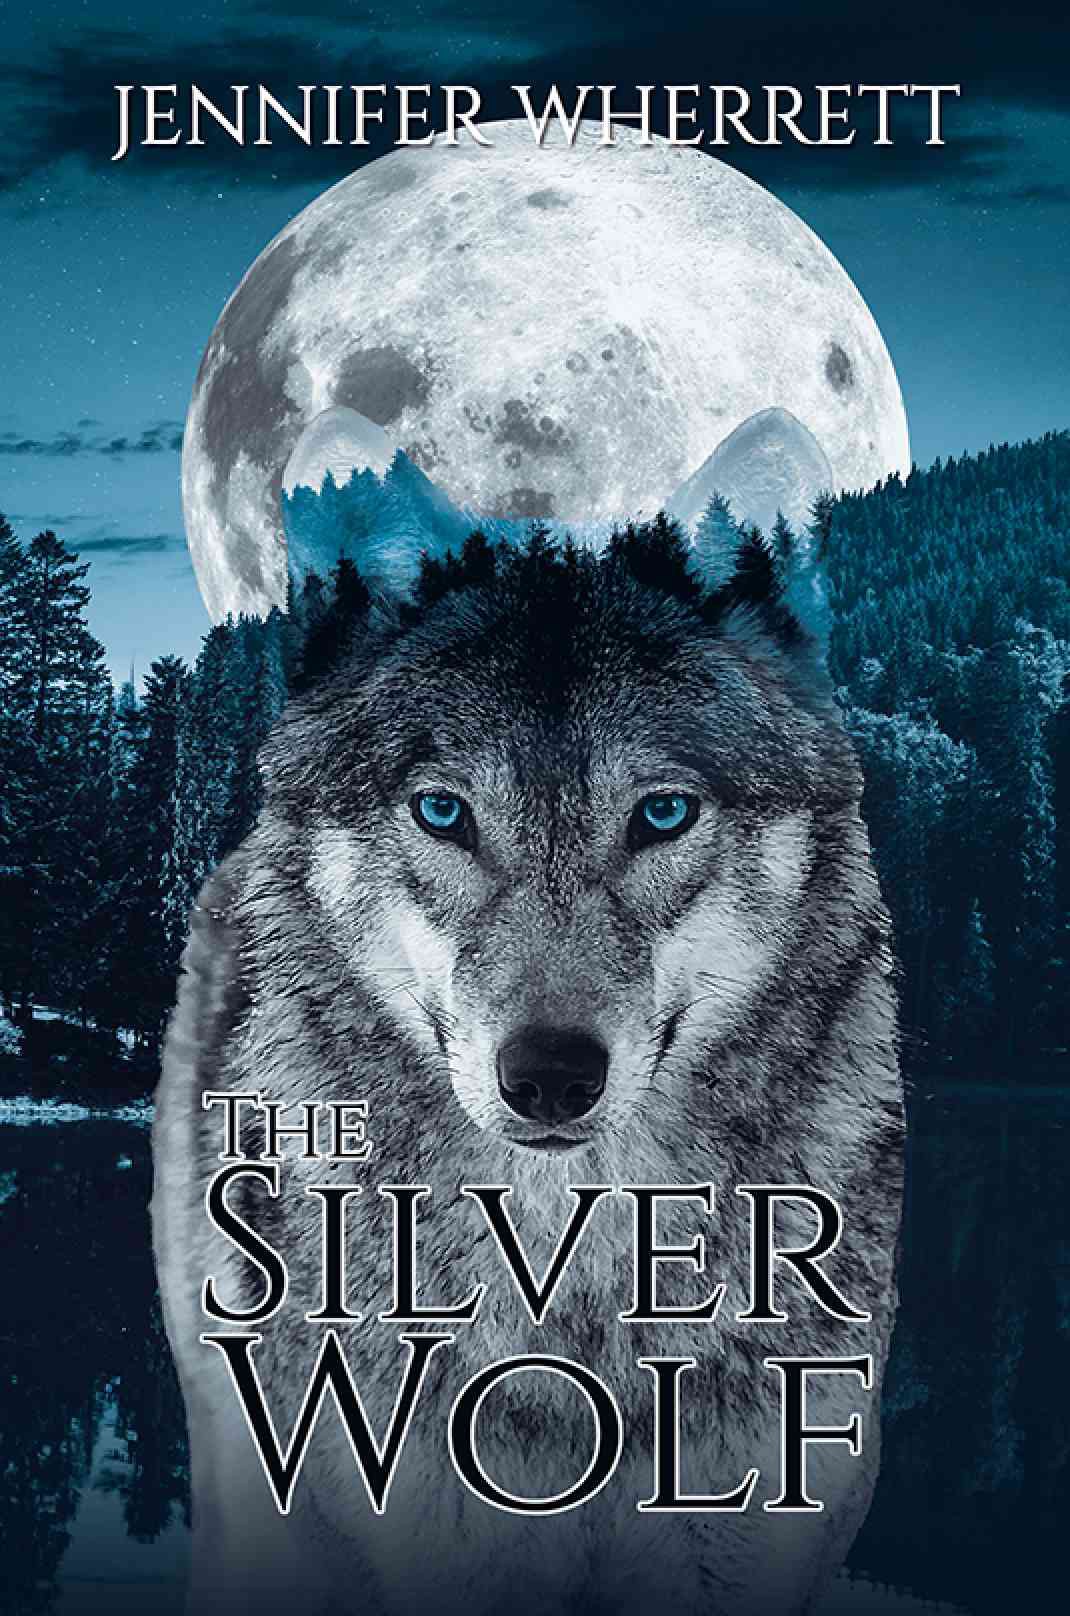 ‘The Silver Wolf’ manages a staggering four-and-a-half-star book review on Book Worm Diaries